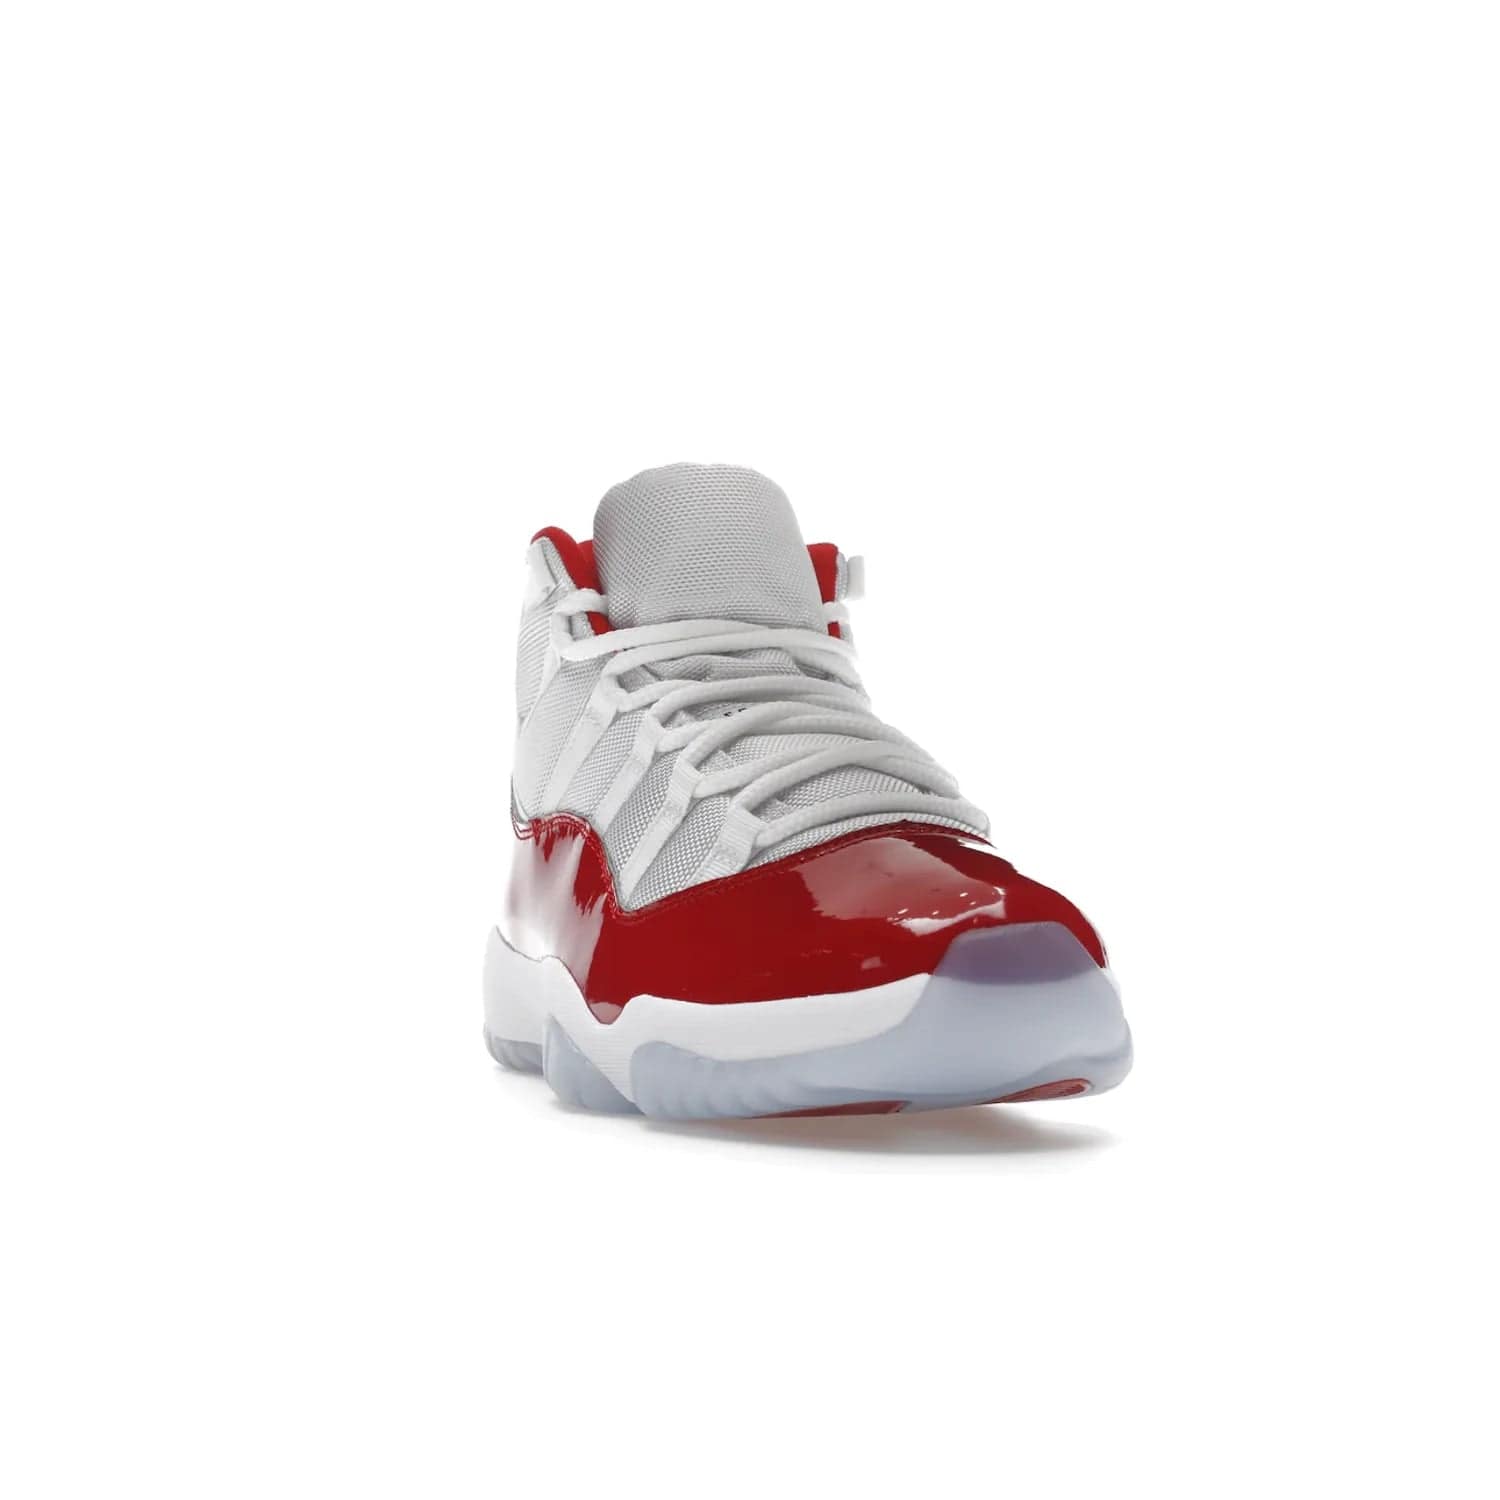 Jordan 11 Retro Cherry (2022) - Image 8 - Only at www.BallersClubKickz.com - The Air Jordan 11 Cherry features classic patent leather with Cherry red accents, icy blue outsole, and debossed 23 on the heel tab. Refresh your sneaker game with this iconic update, available December 10, 2022.